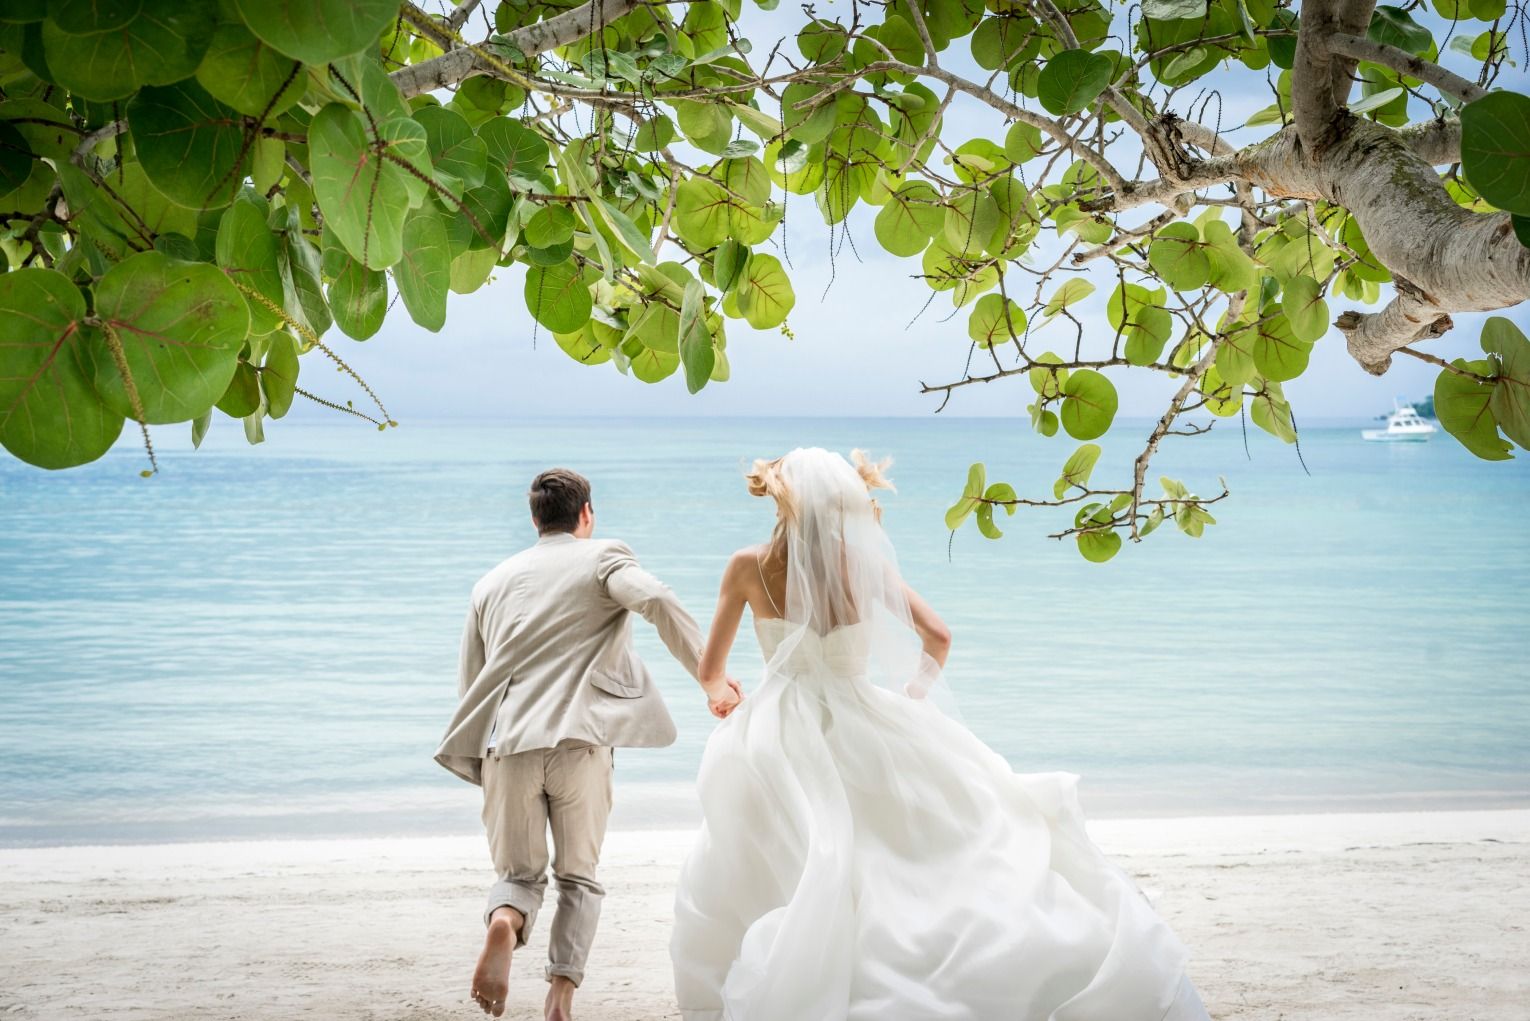 How to Plan a Beach Wedding in Jamaica - Couples Resorts